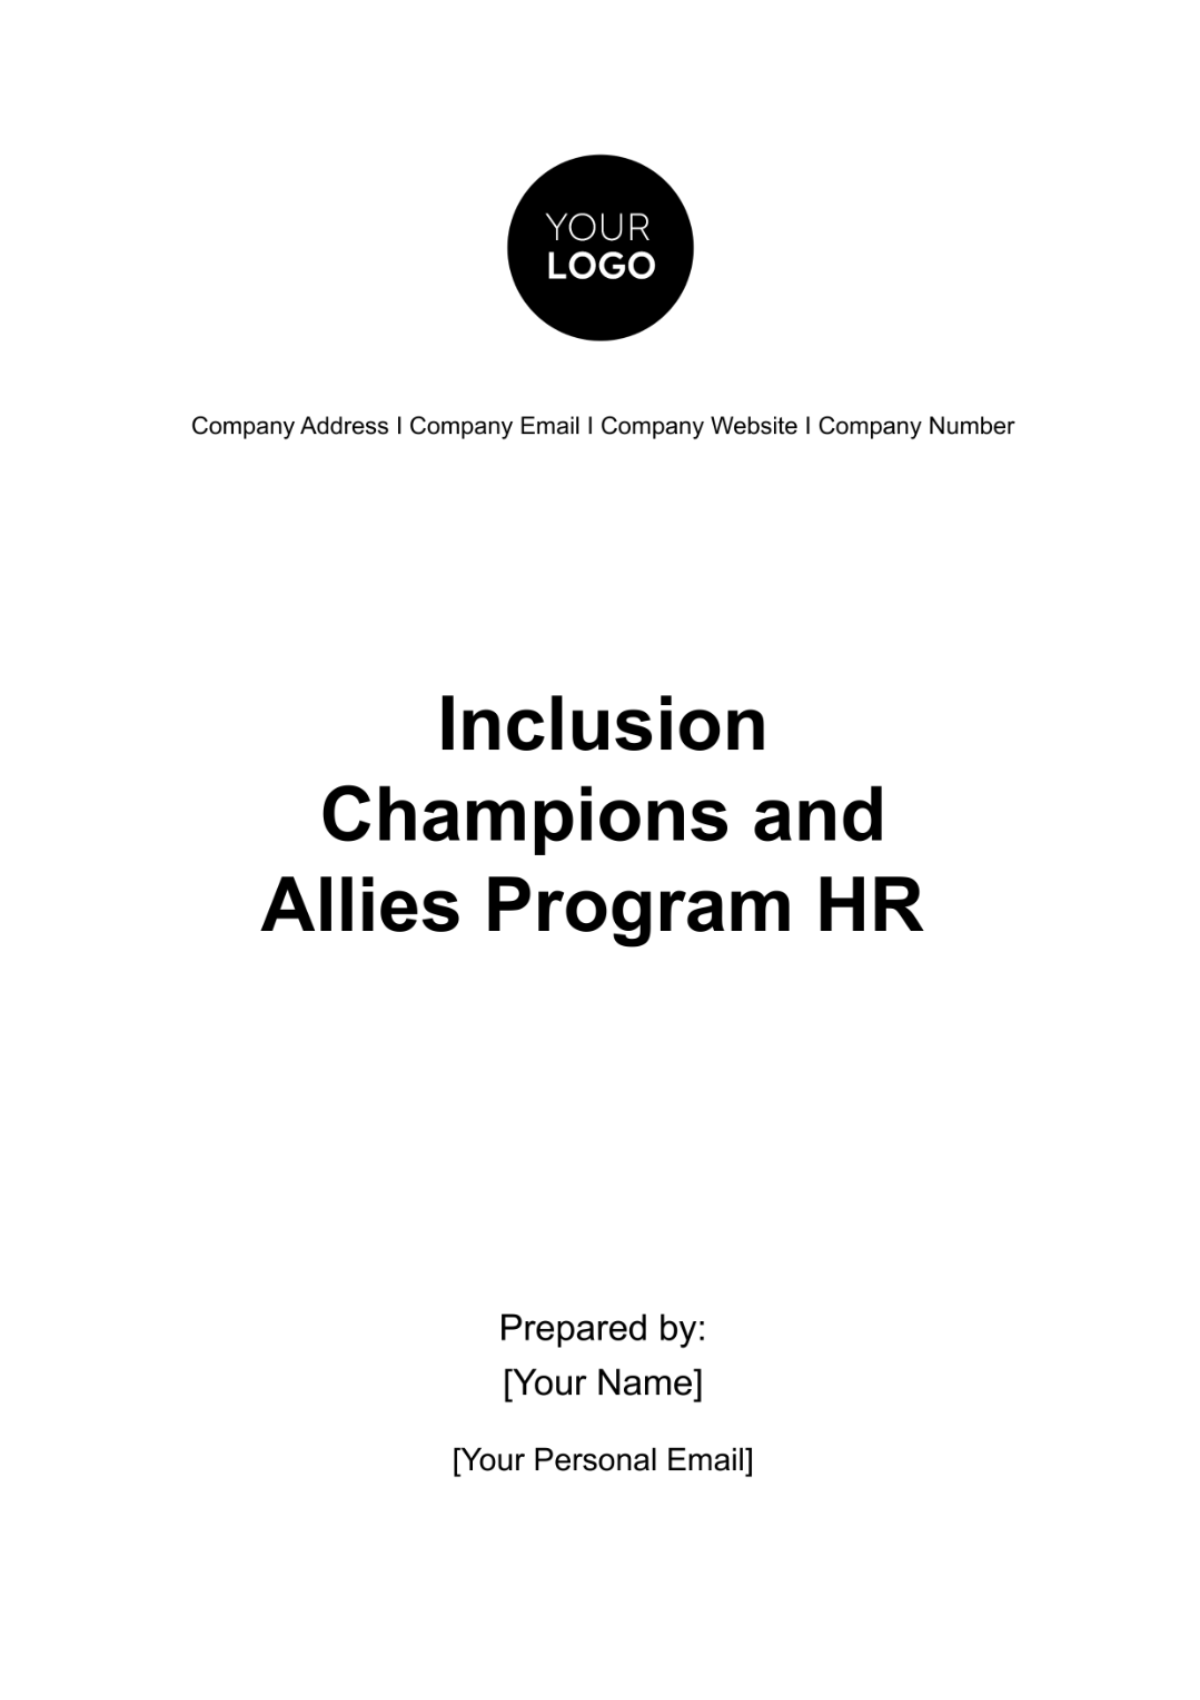 Free Inclusion Champions and Allies Program HR Template